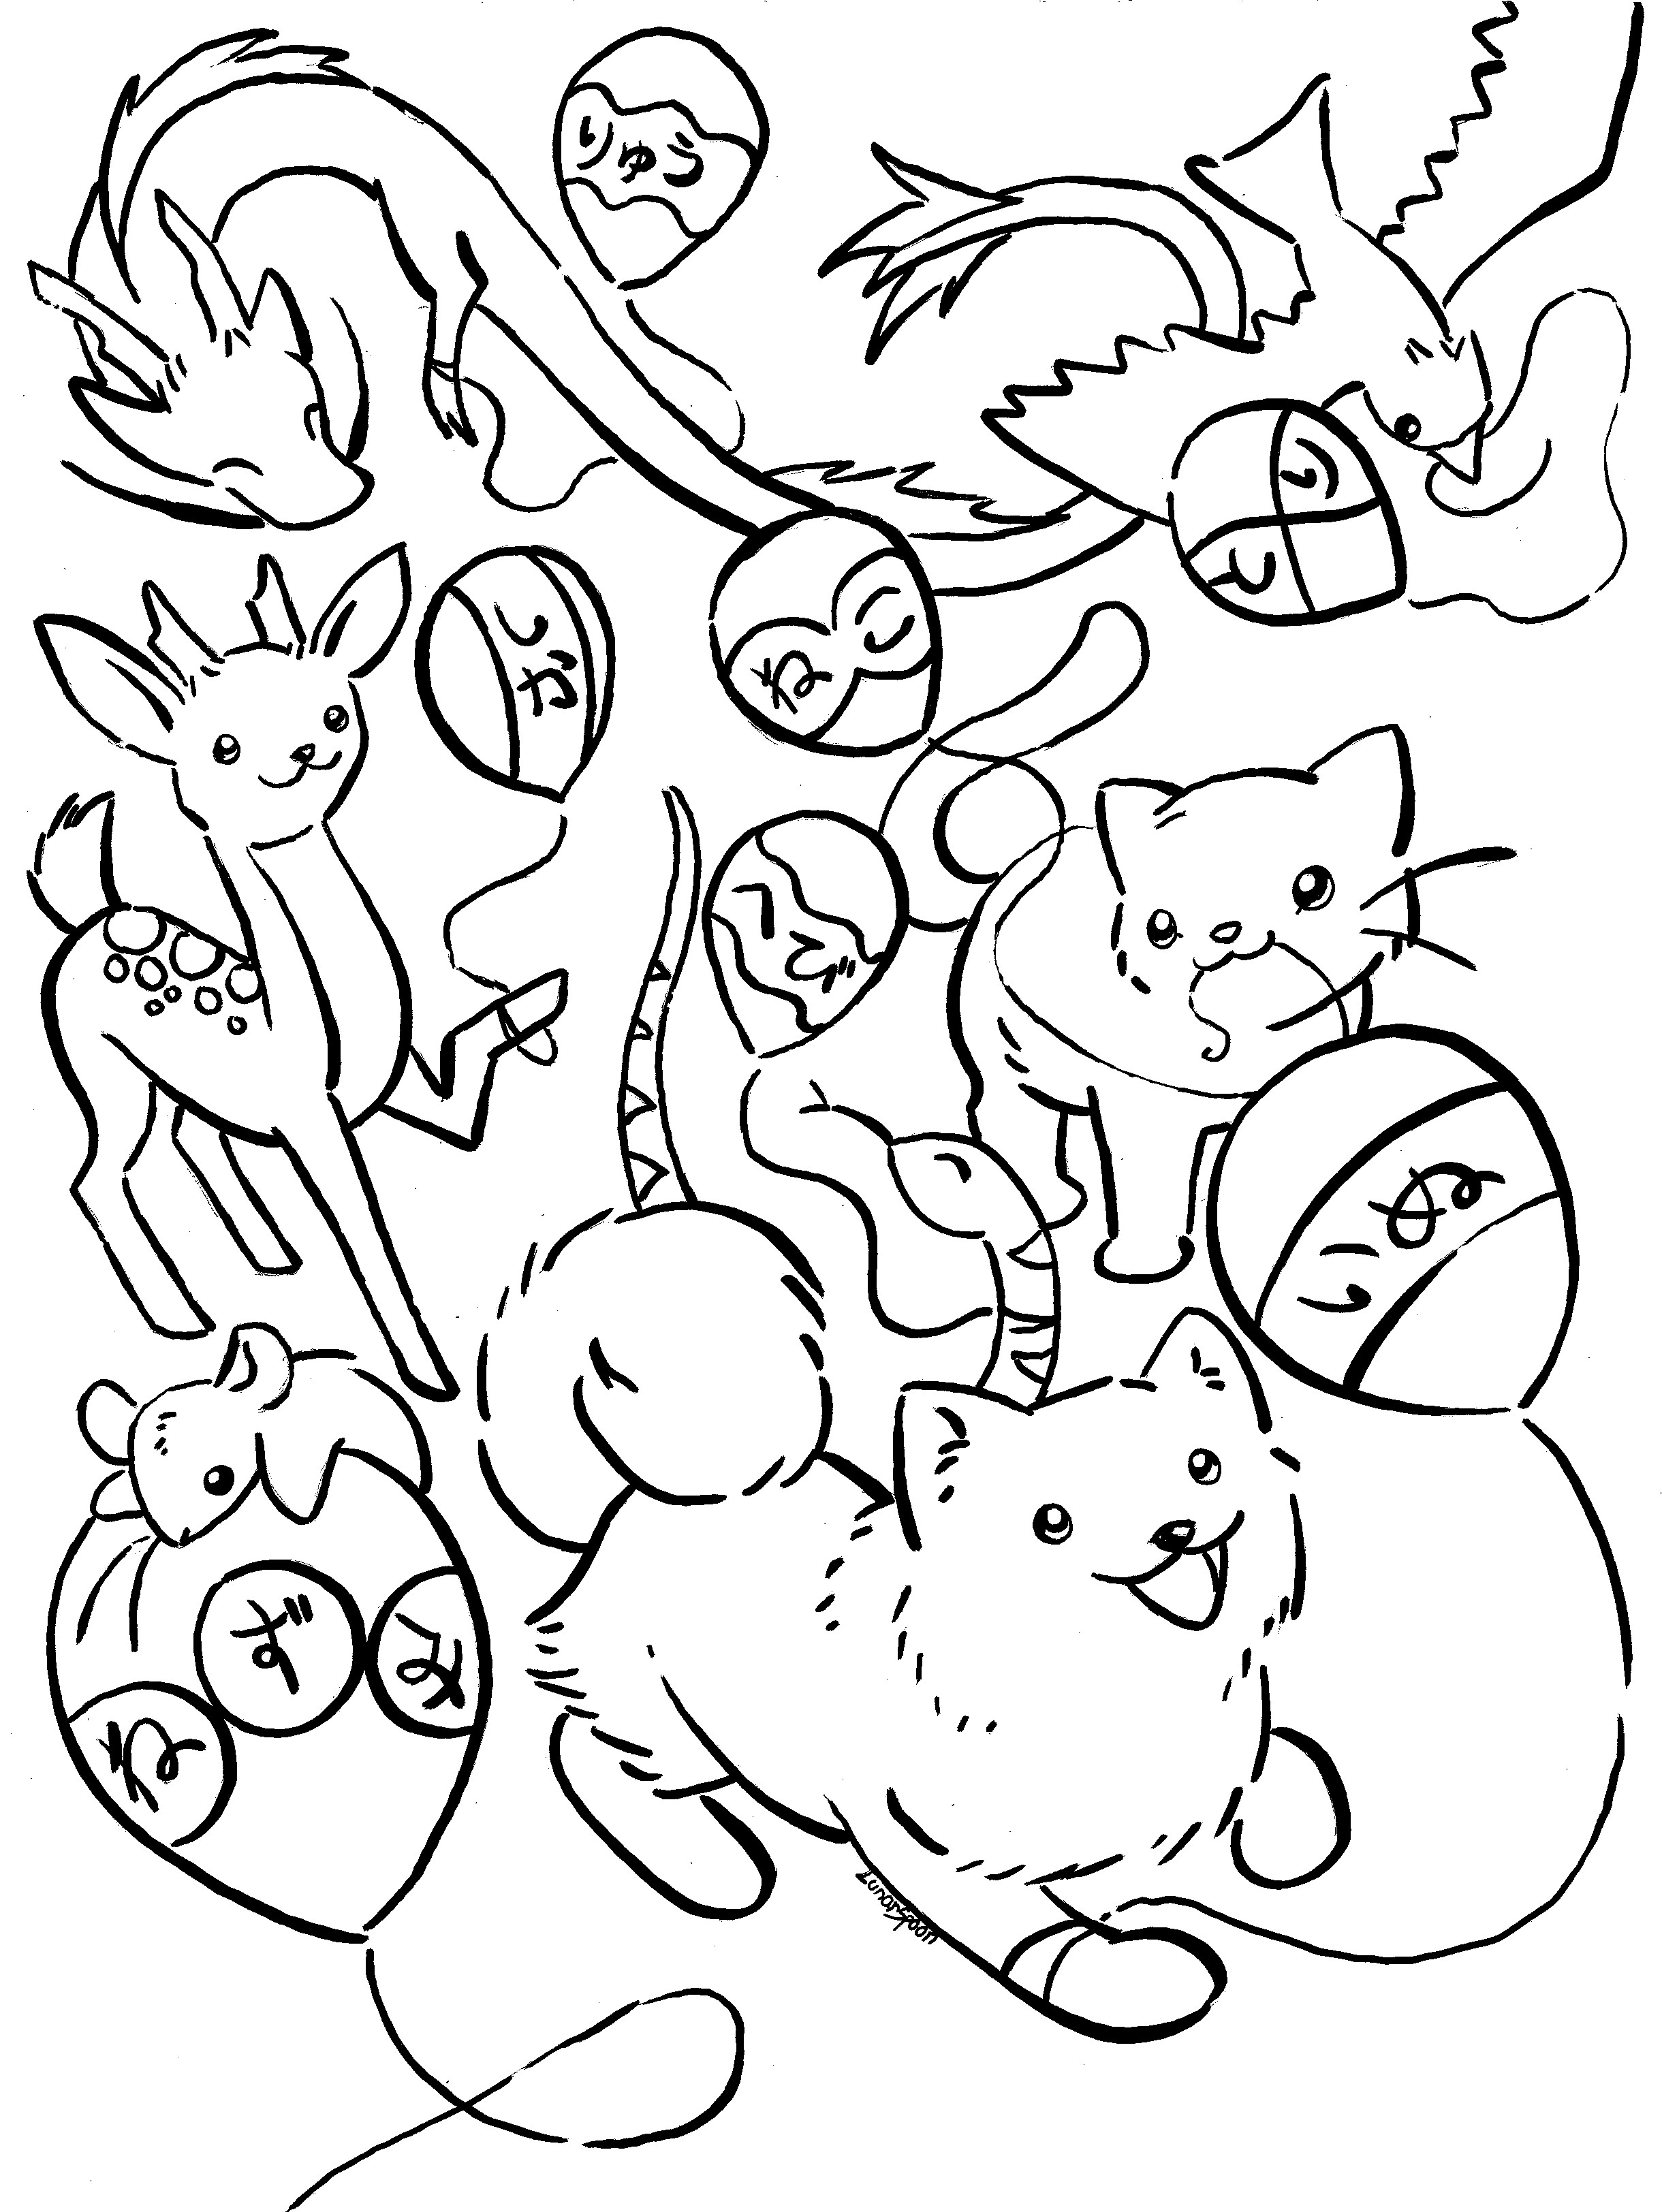 Japanese Coloring Pages
 Japanese Animals Coloring Page by LunarSpoon on DeviantArt